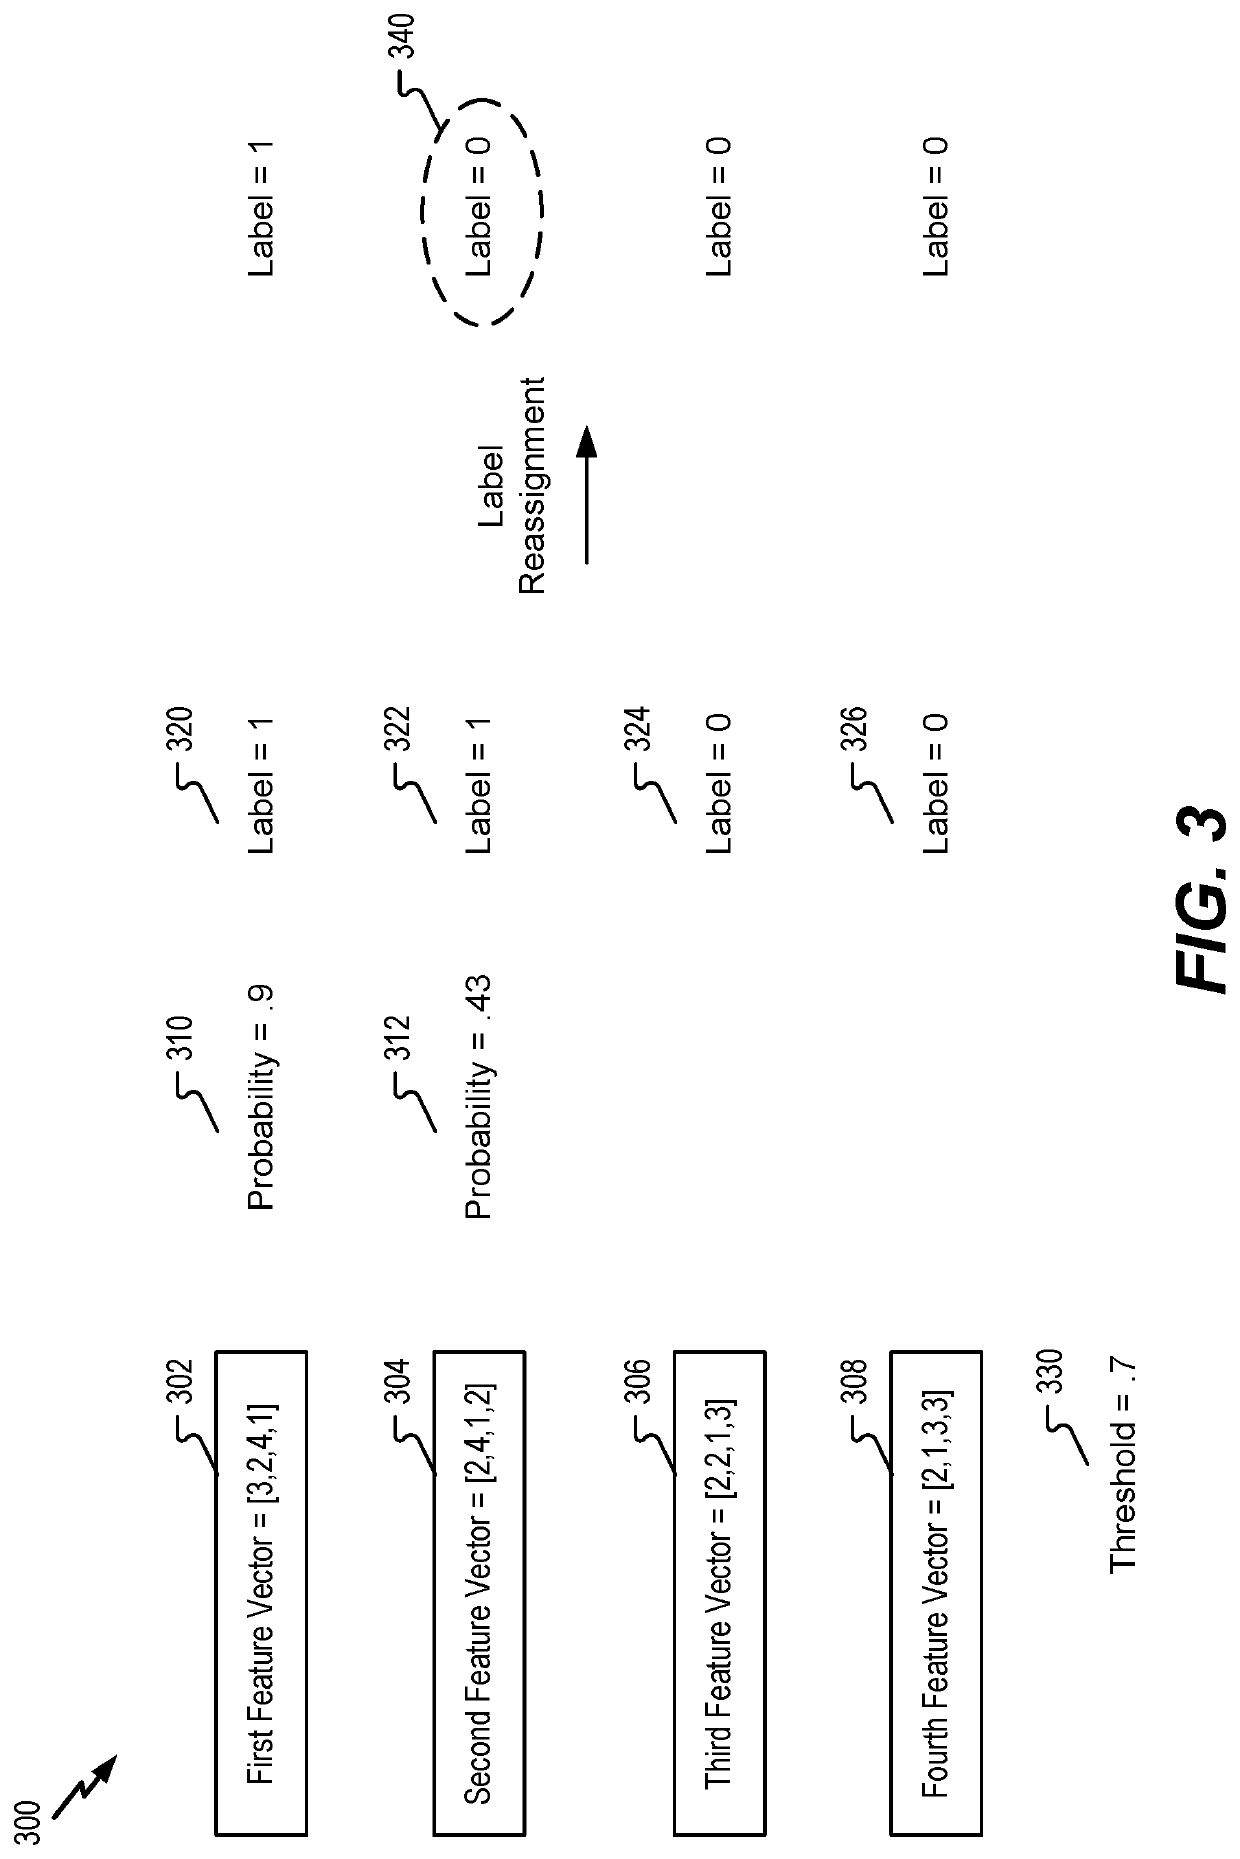 System and method for generating an aircraft fault prediction classifier